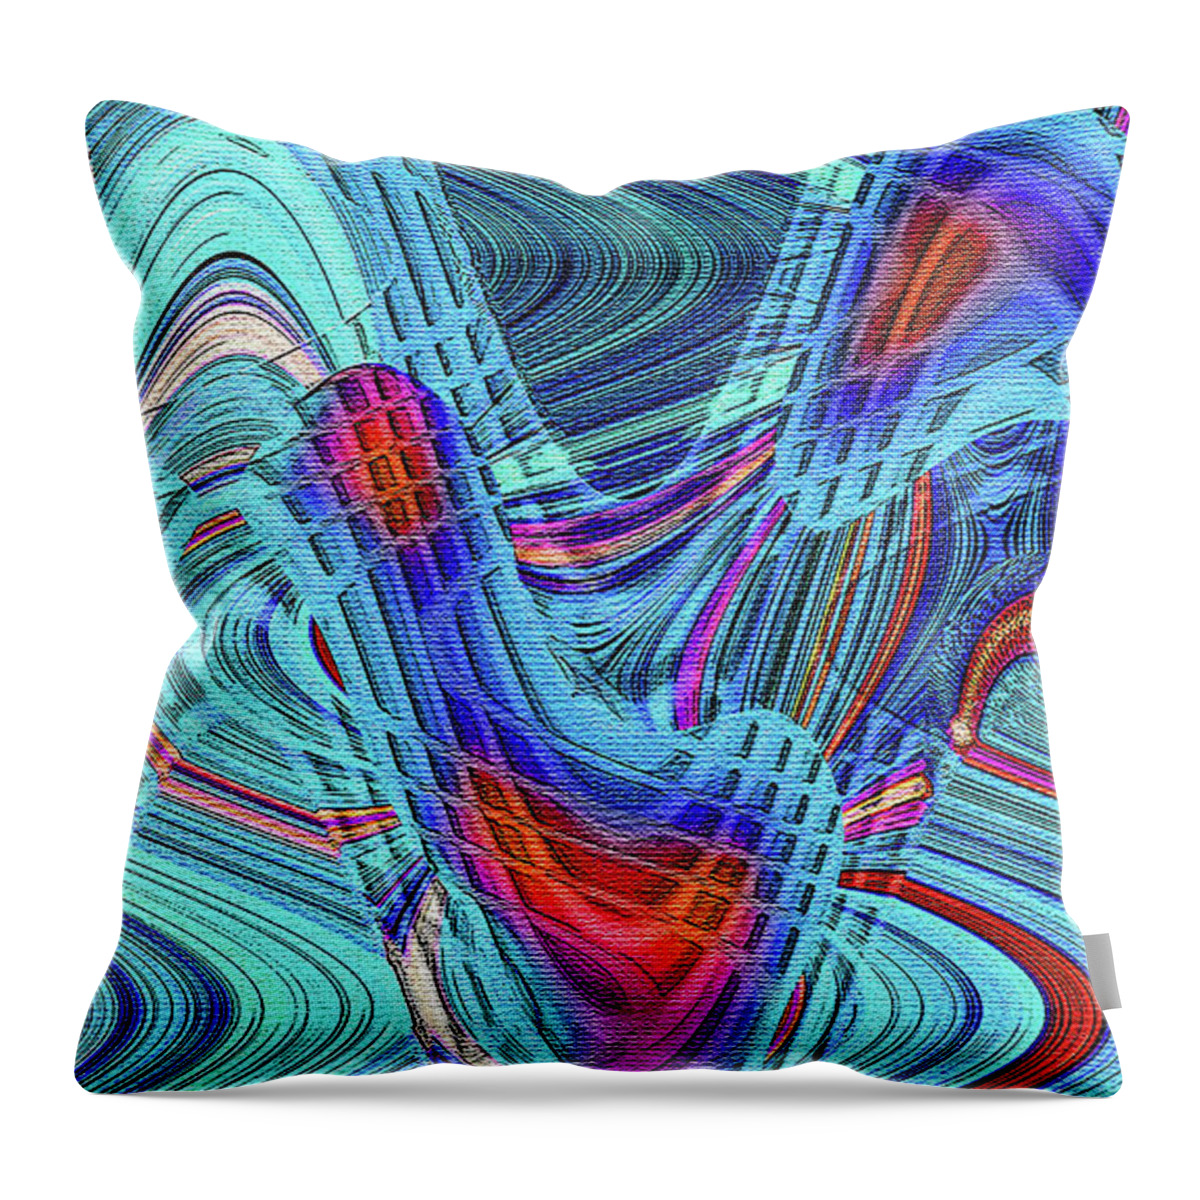 Tom Stanley Janca Abstract #113007#ps1dt Throw Pillow featuring the digital art Tom Stanley Janca Abstract #113007#ps1dt by Tom Janca